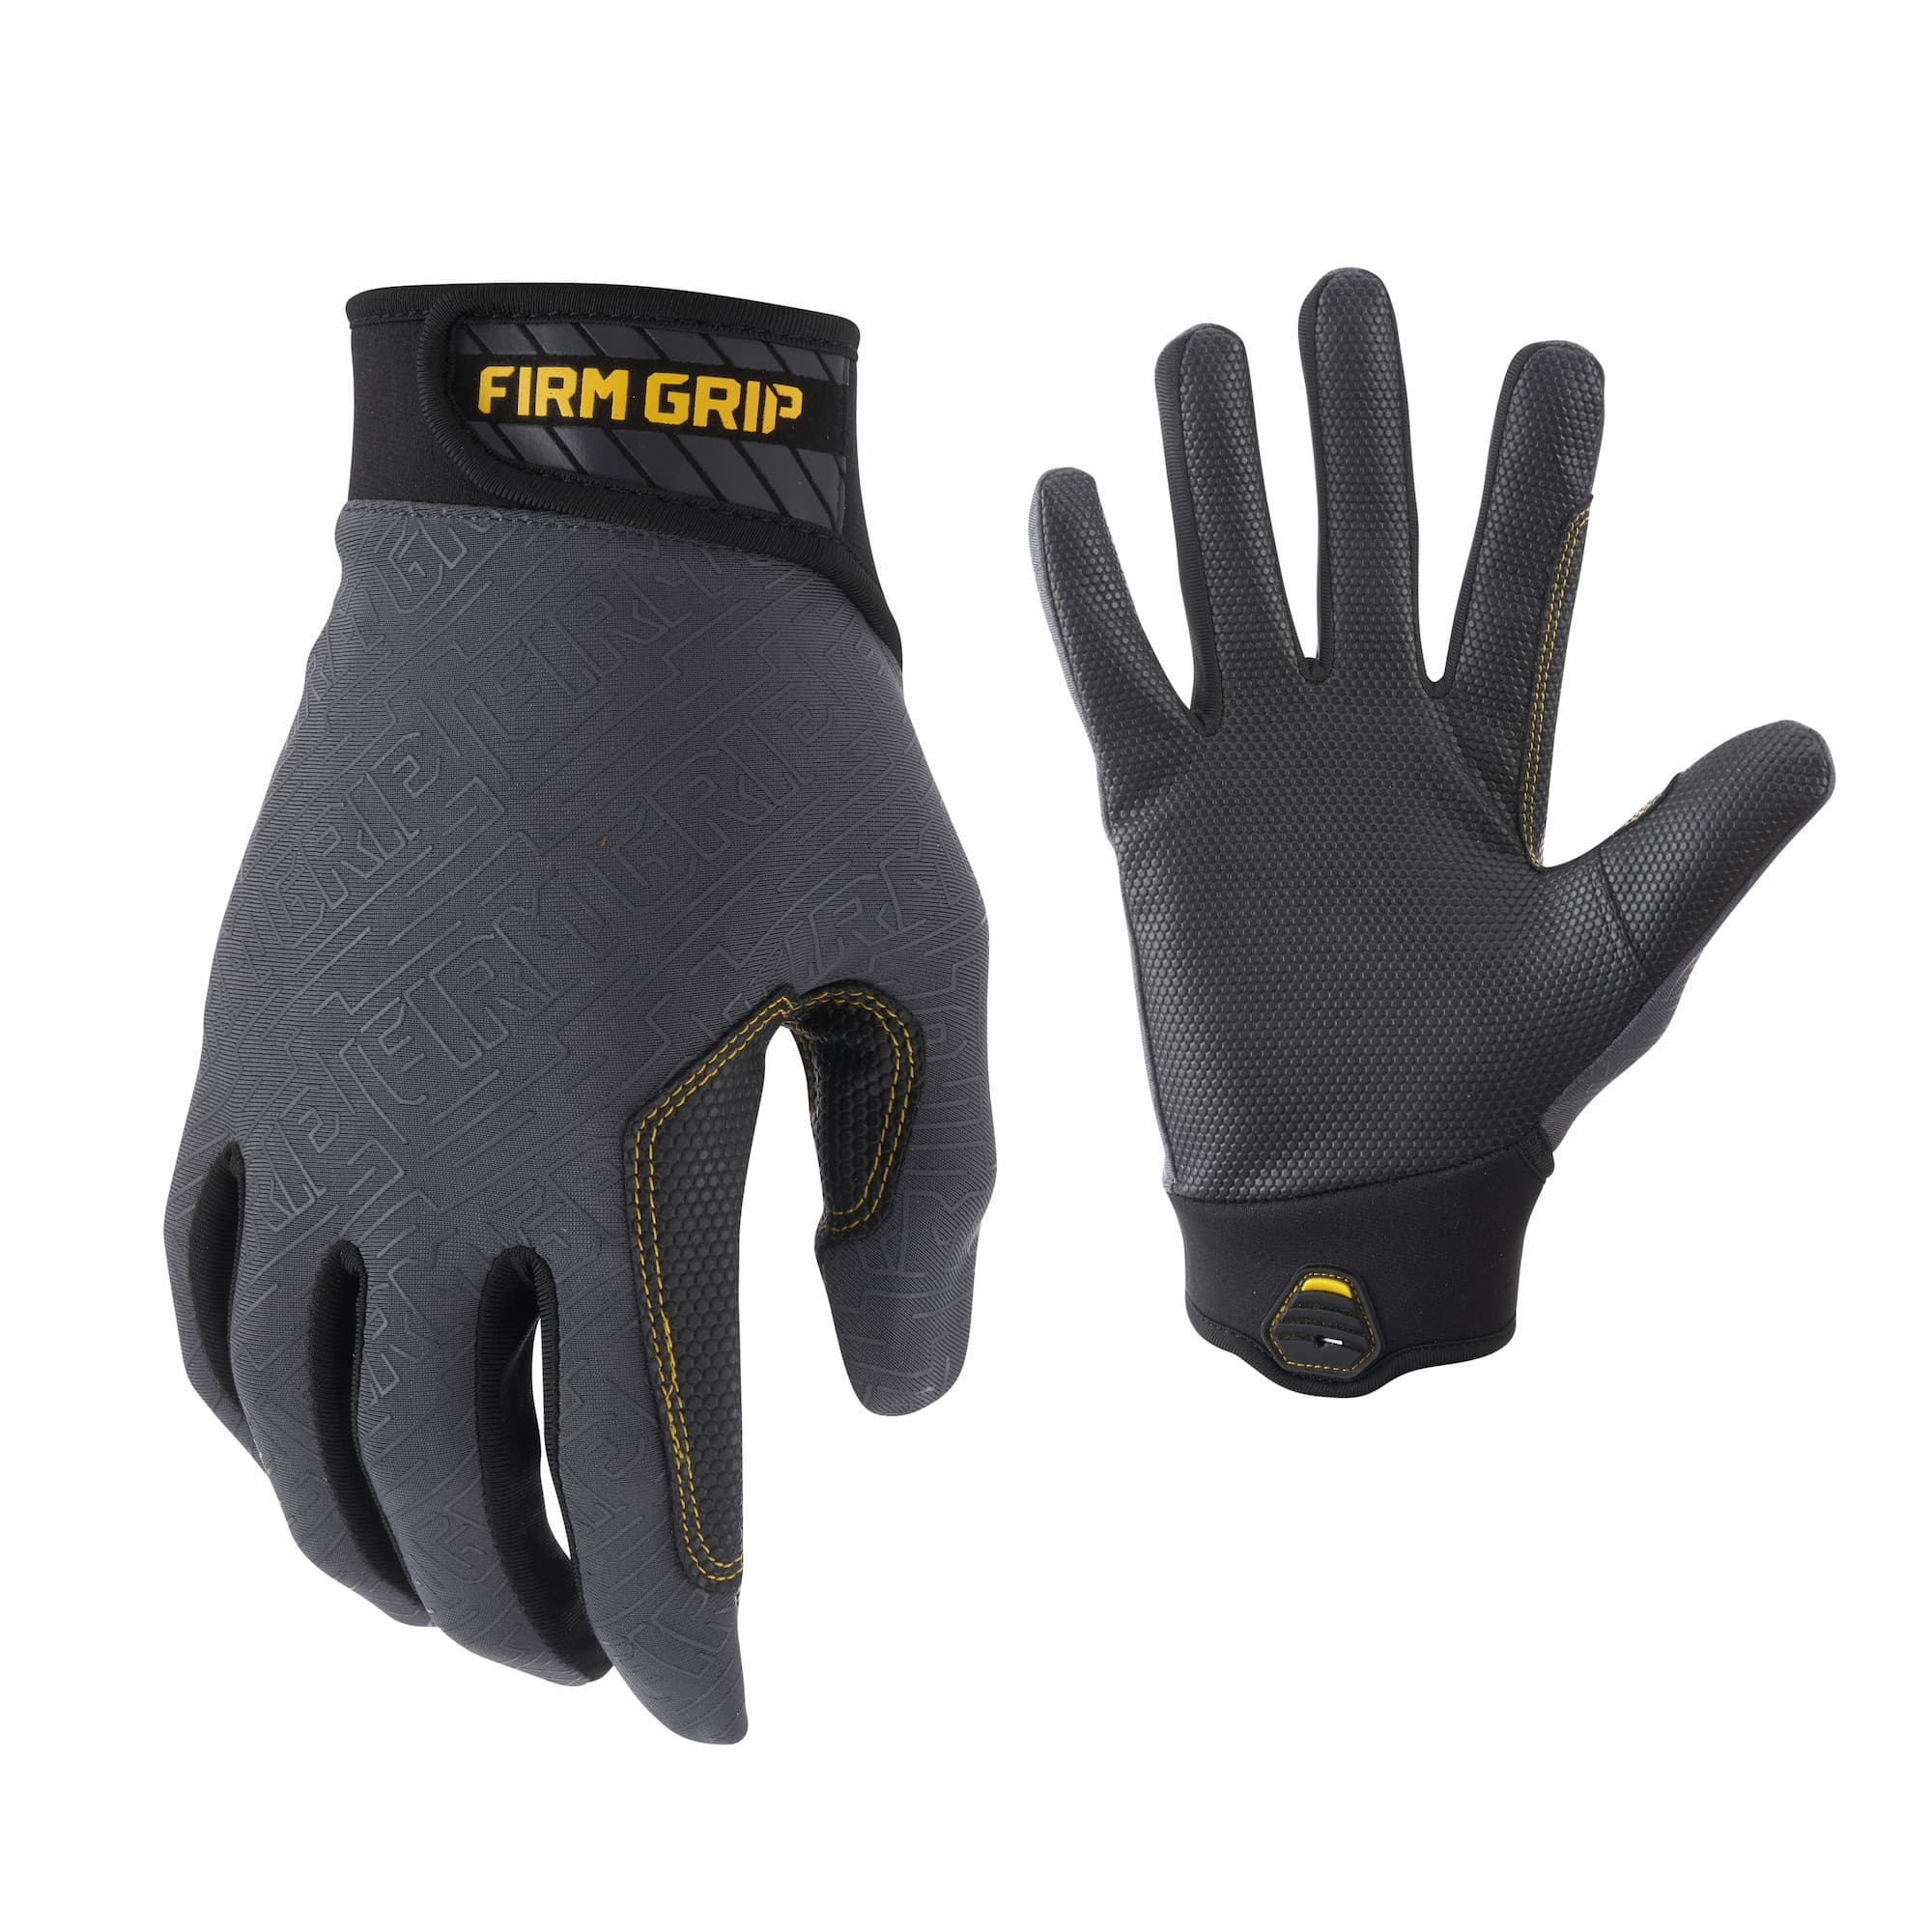 105590 1 PAIR SUPER GRIPPER CONTRACTOR GLOVES GREEN/BLACK WITH SYNTHETIC  LEATHER PALM GRAY(L) ☑️ Mississauga, Toronto & Ottawa